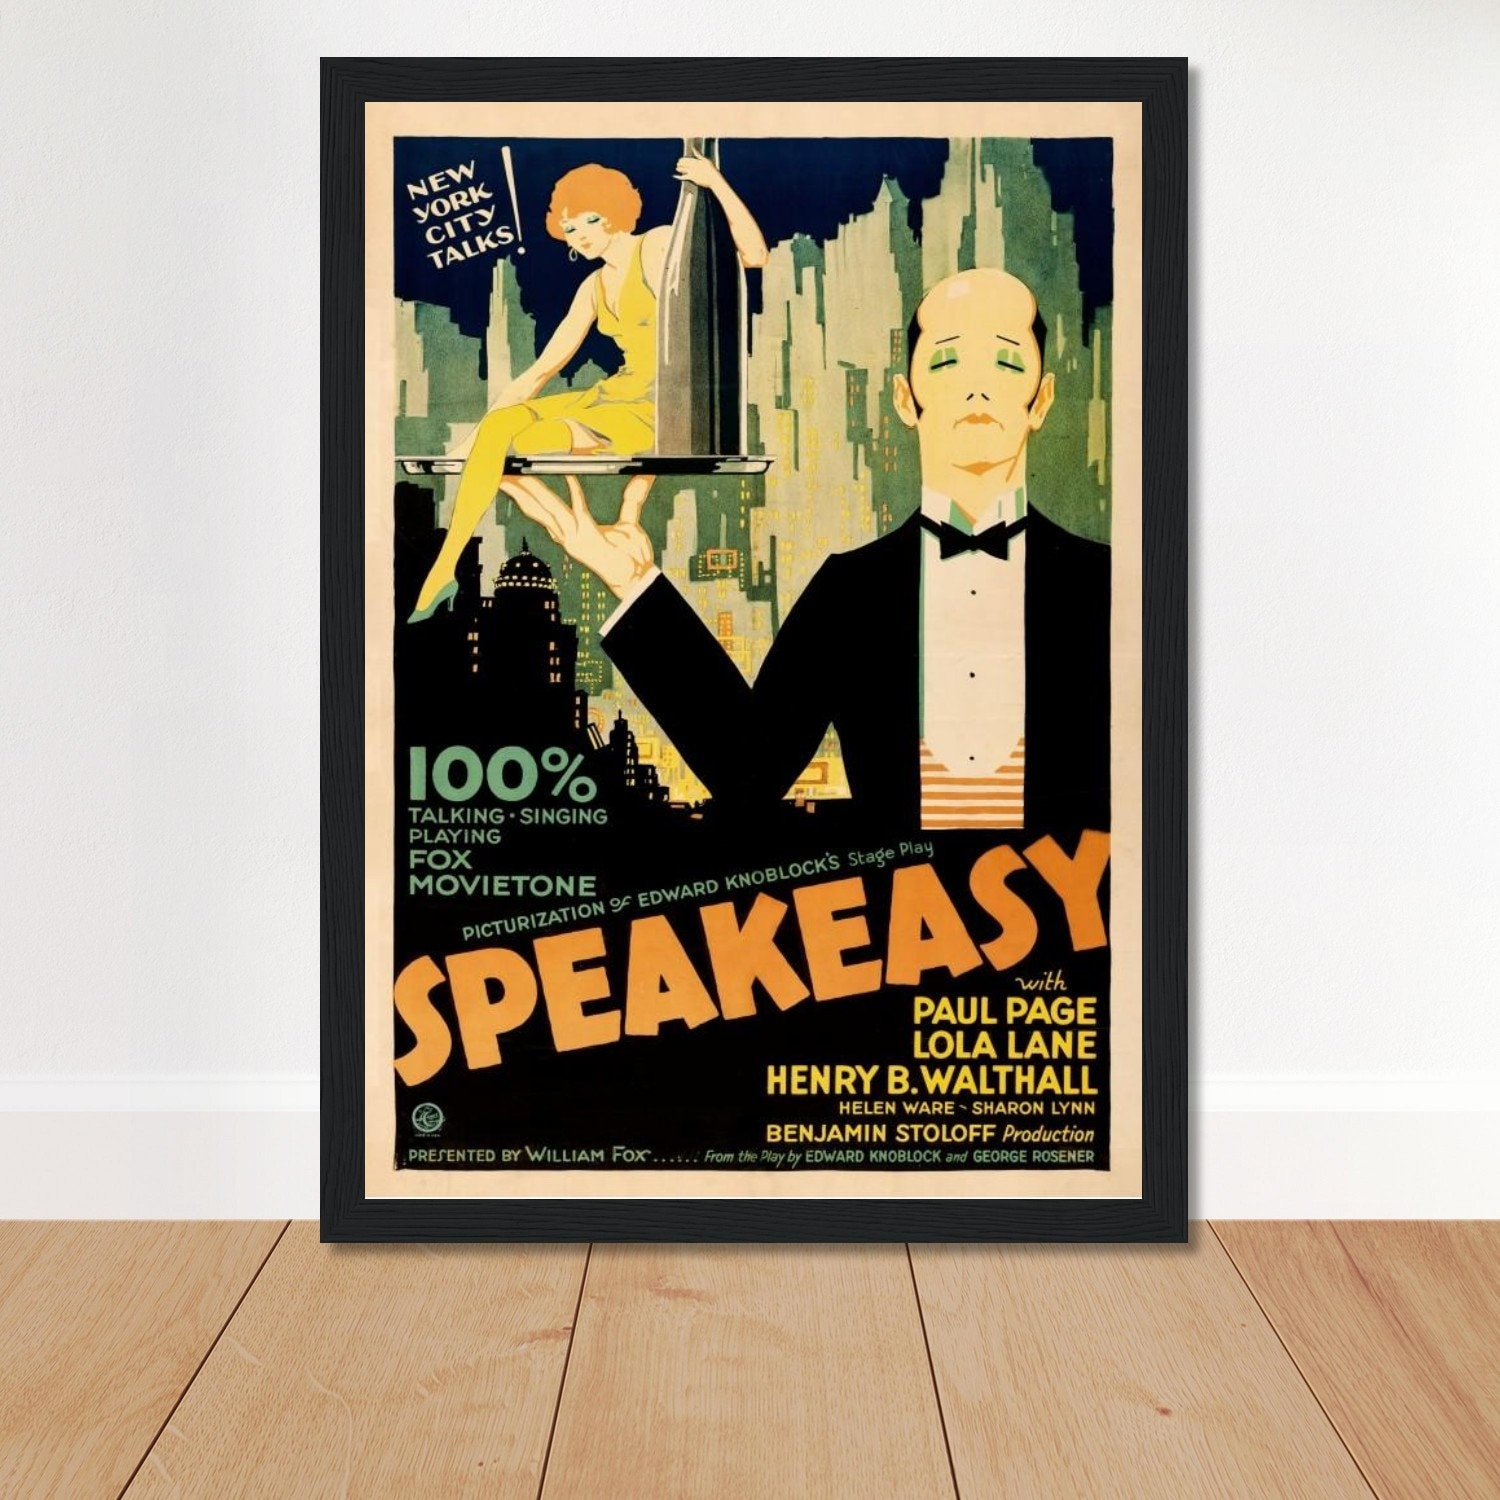 Speakeasy - Bust - Photo - Prohibition Wall Art - Print - Prohibition - Bar  Cart Decor - Home Brewery - Brewing - Craft Beer Gift, Bar Decor